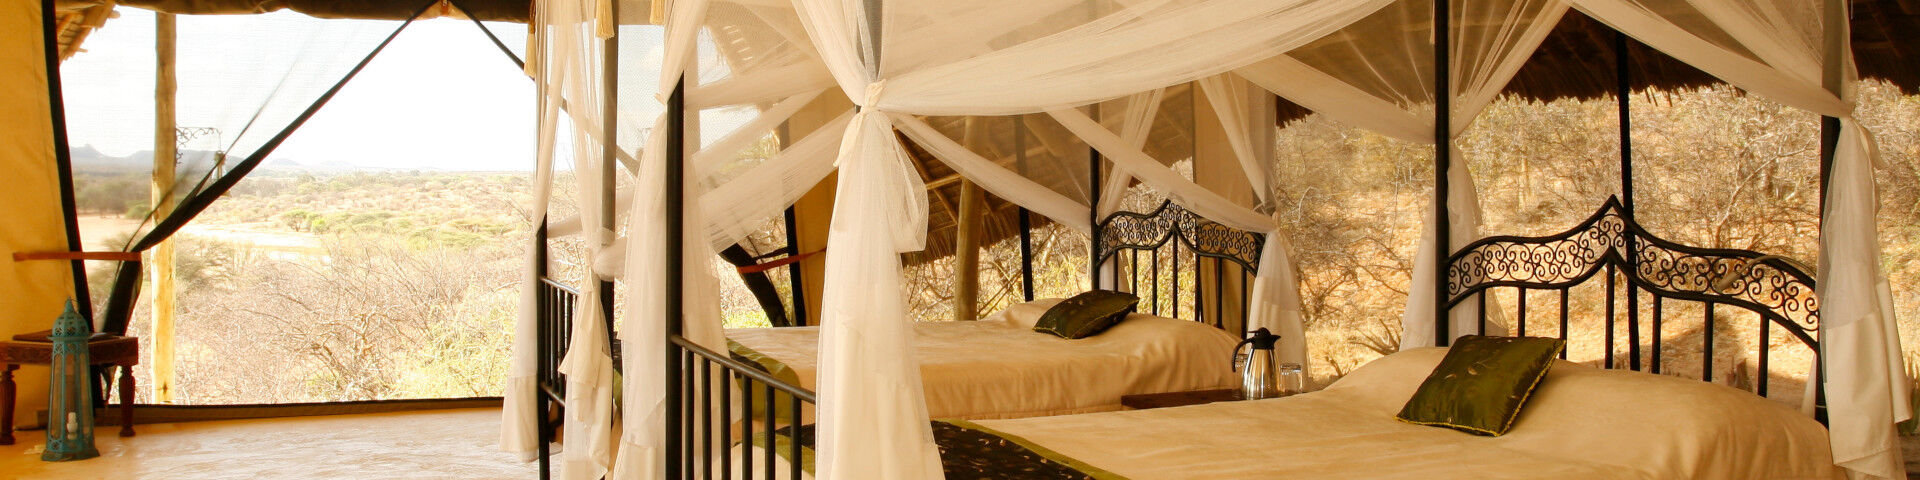 Accommodation in Samburu National Reserve Twin Room with a View